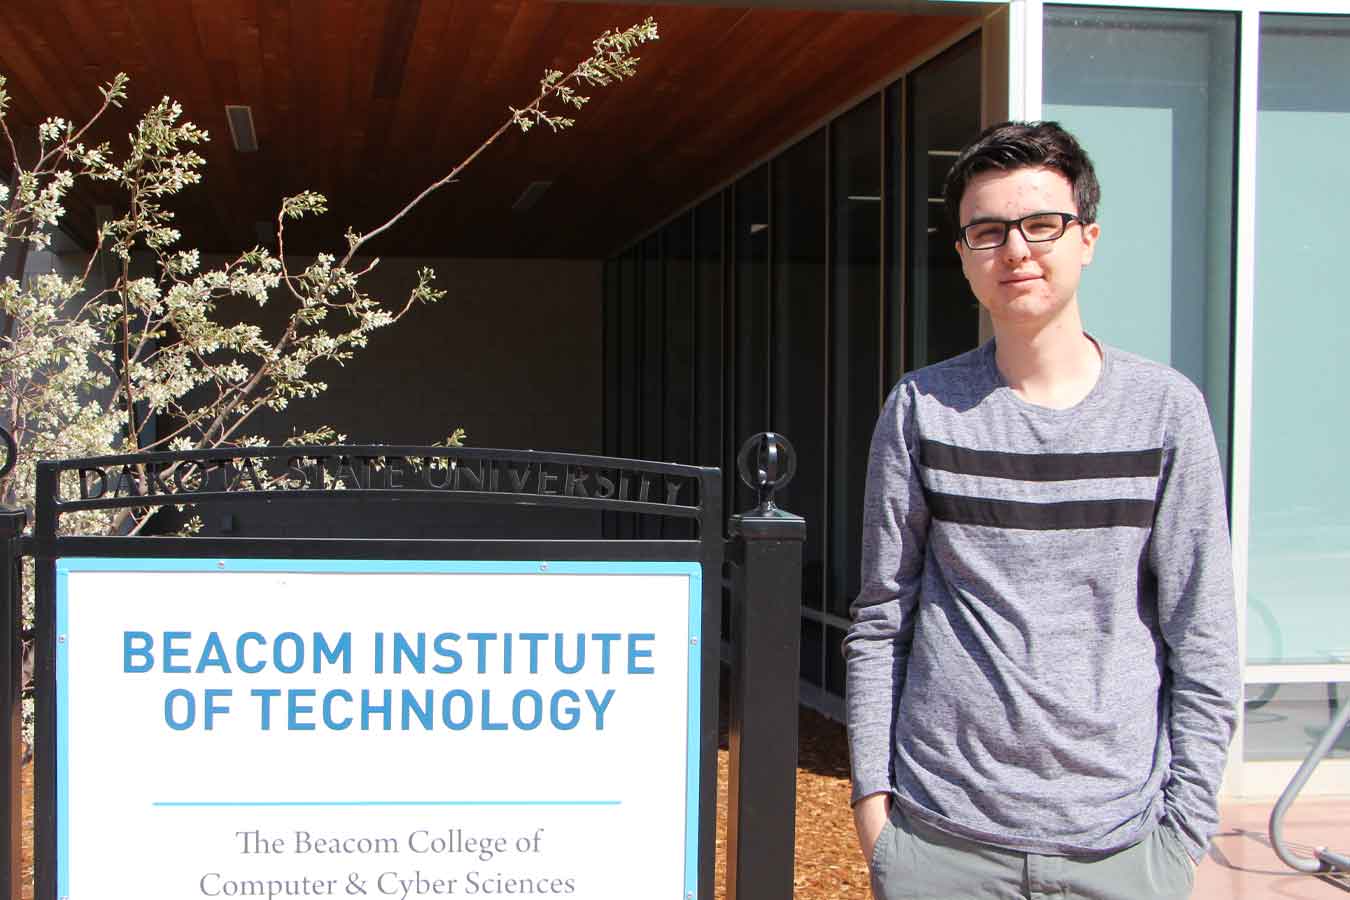 Spencer Sexton standing in front of the Beacom College of computer & Cyber Sciences